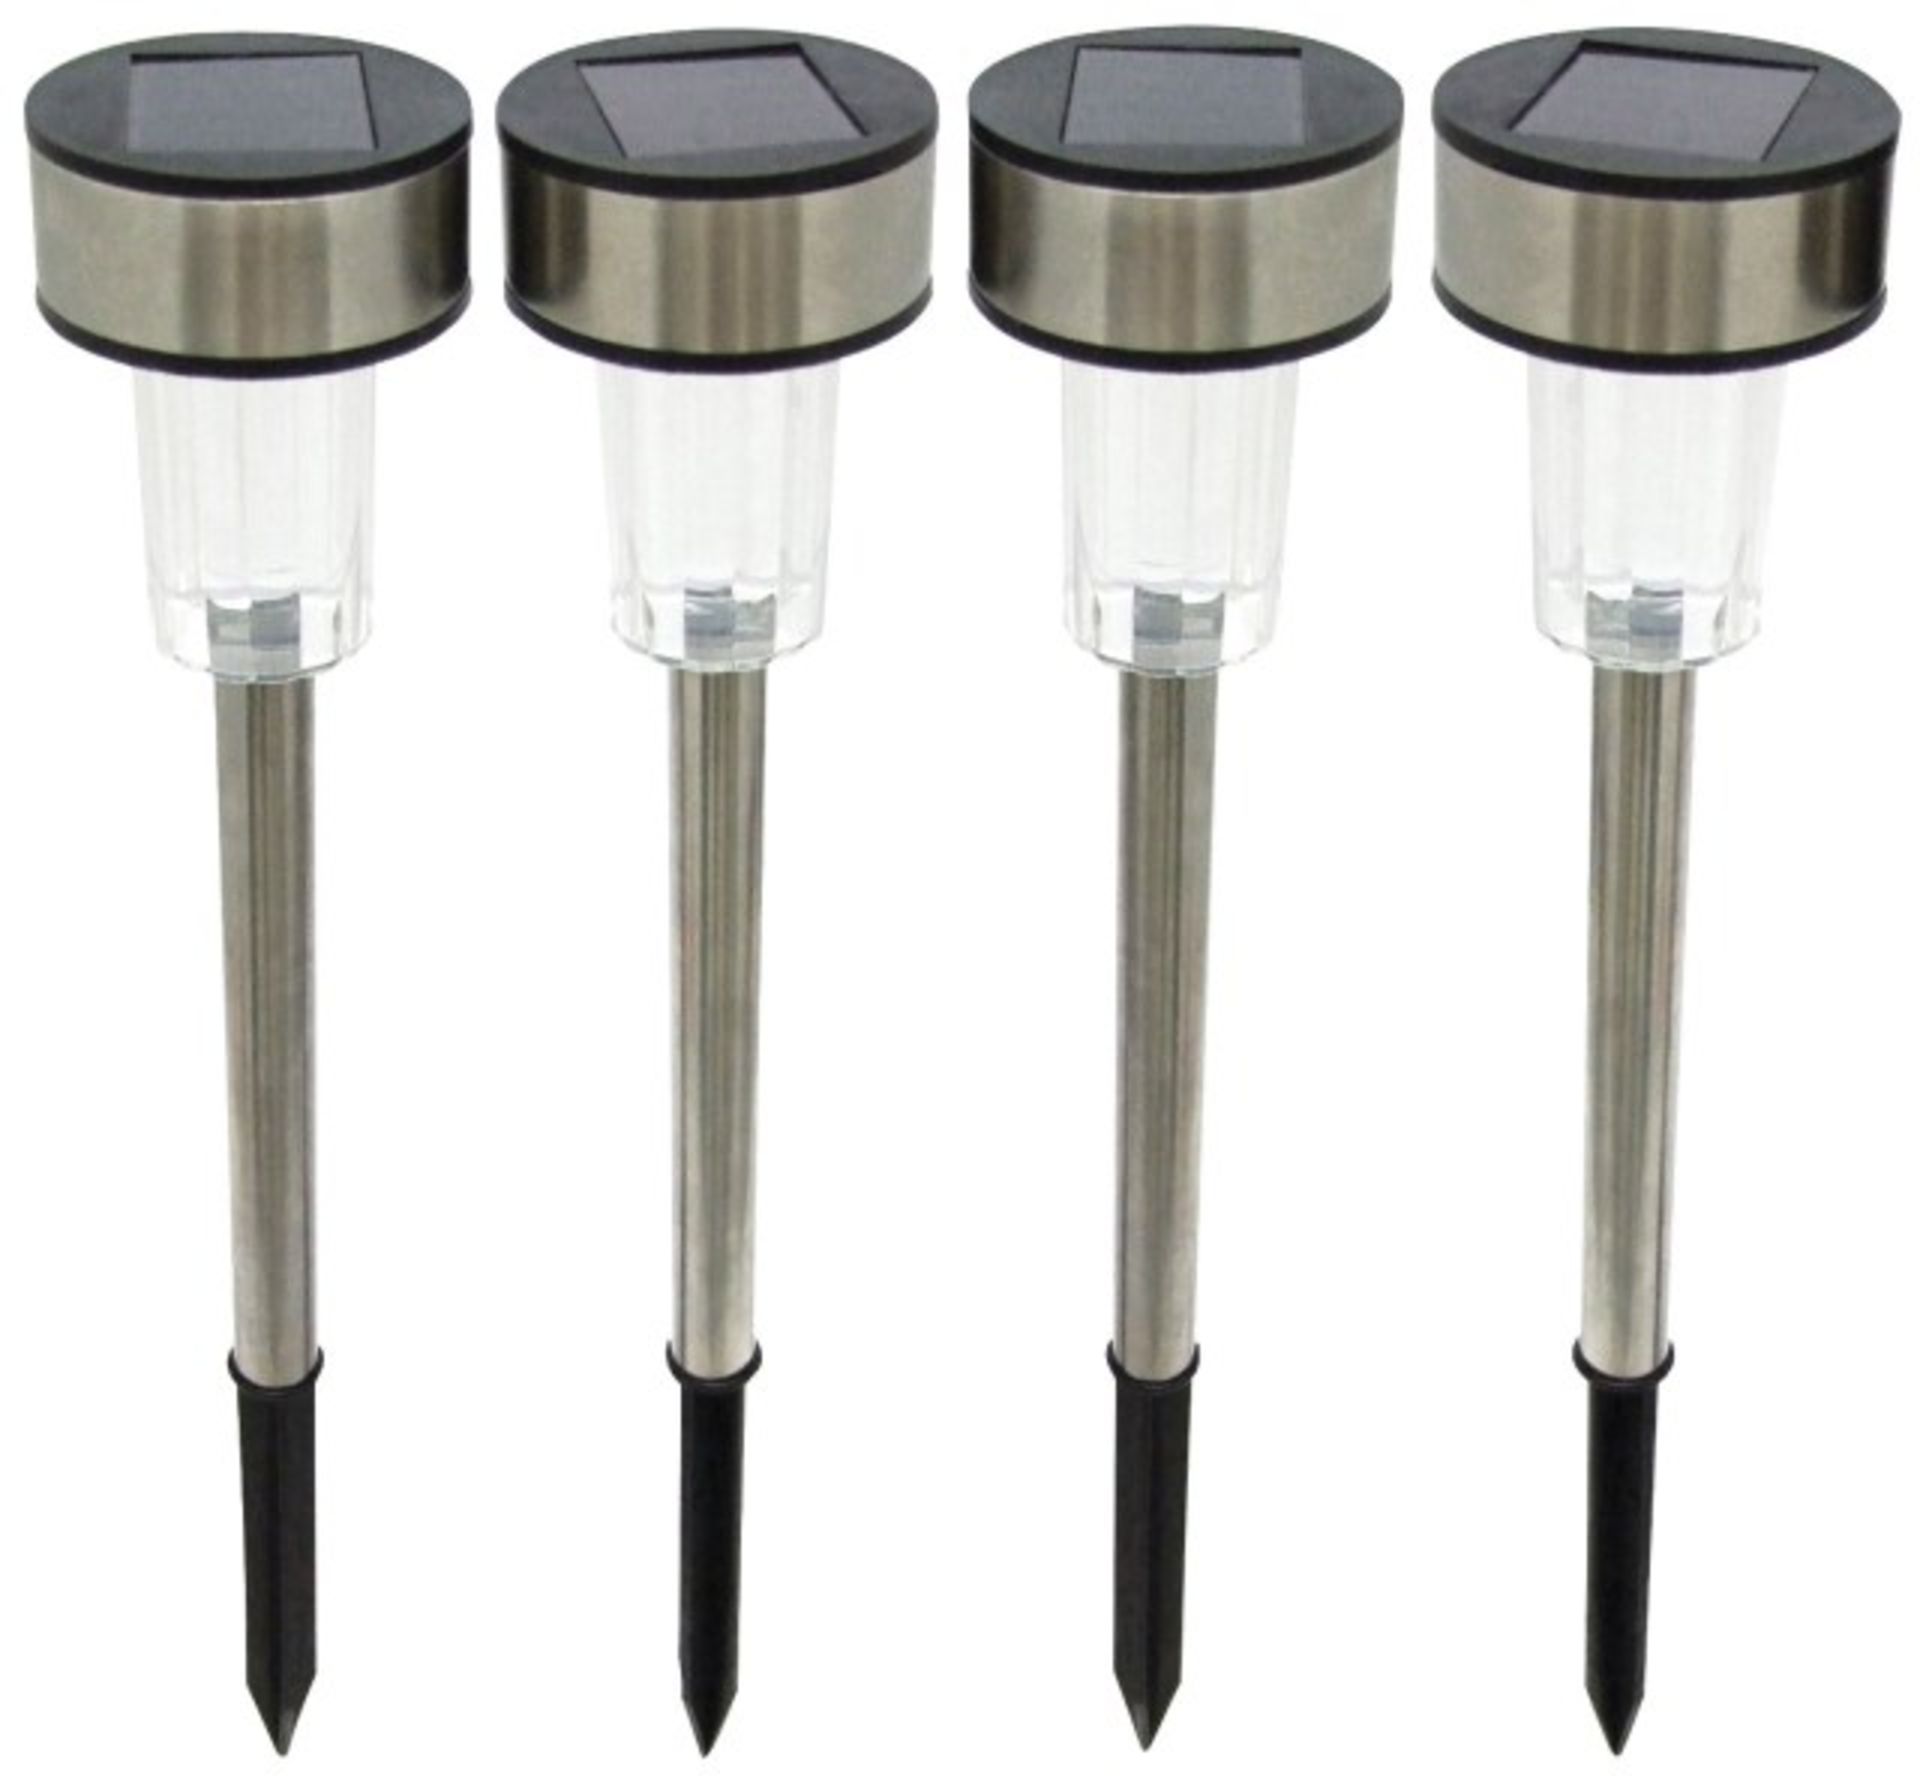 V Brand New Set Of 4 Kempton Stainless Steel Solar Lights X 3 Bid price to be multiplied by Three